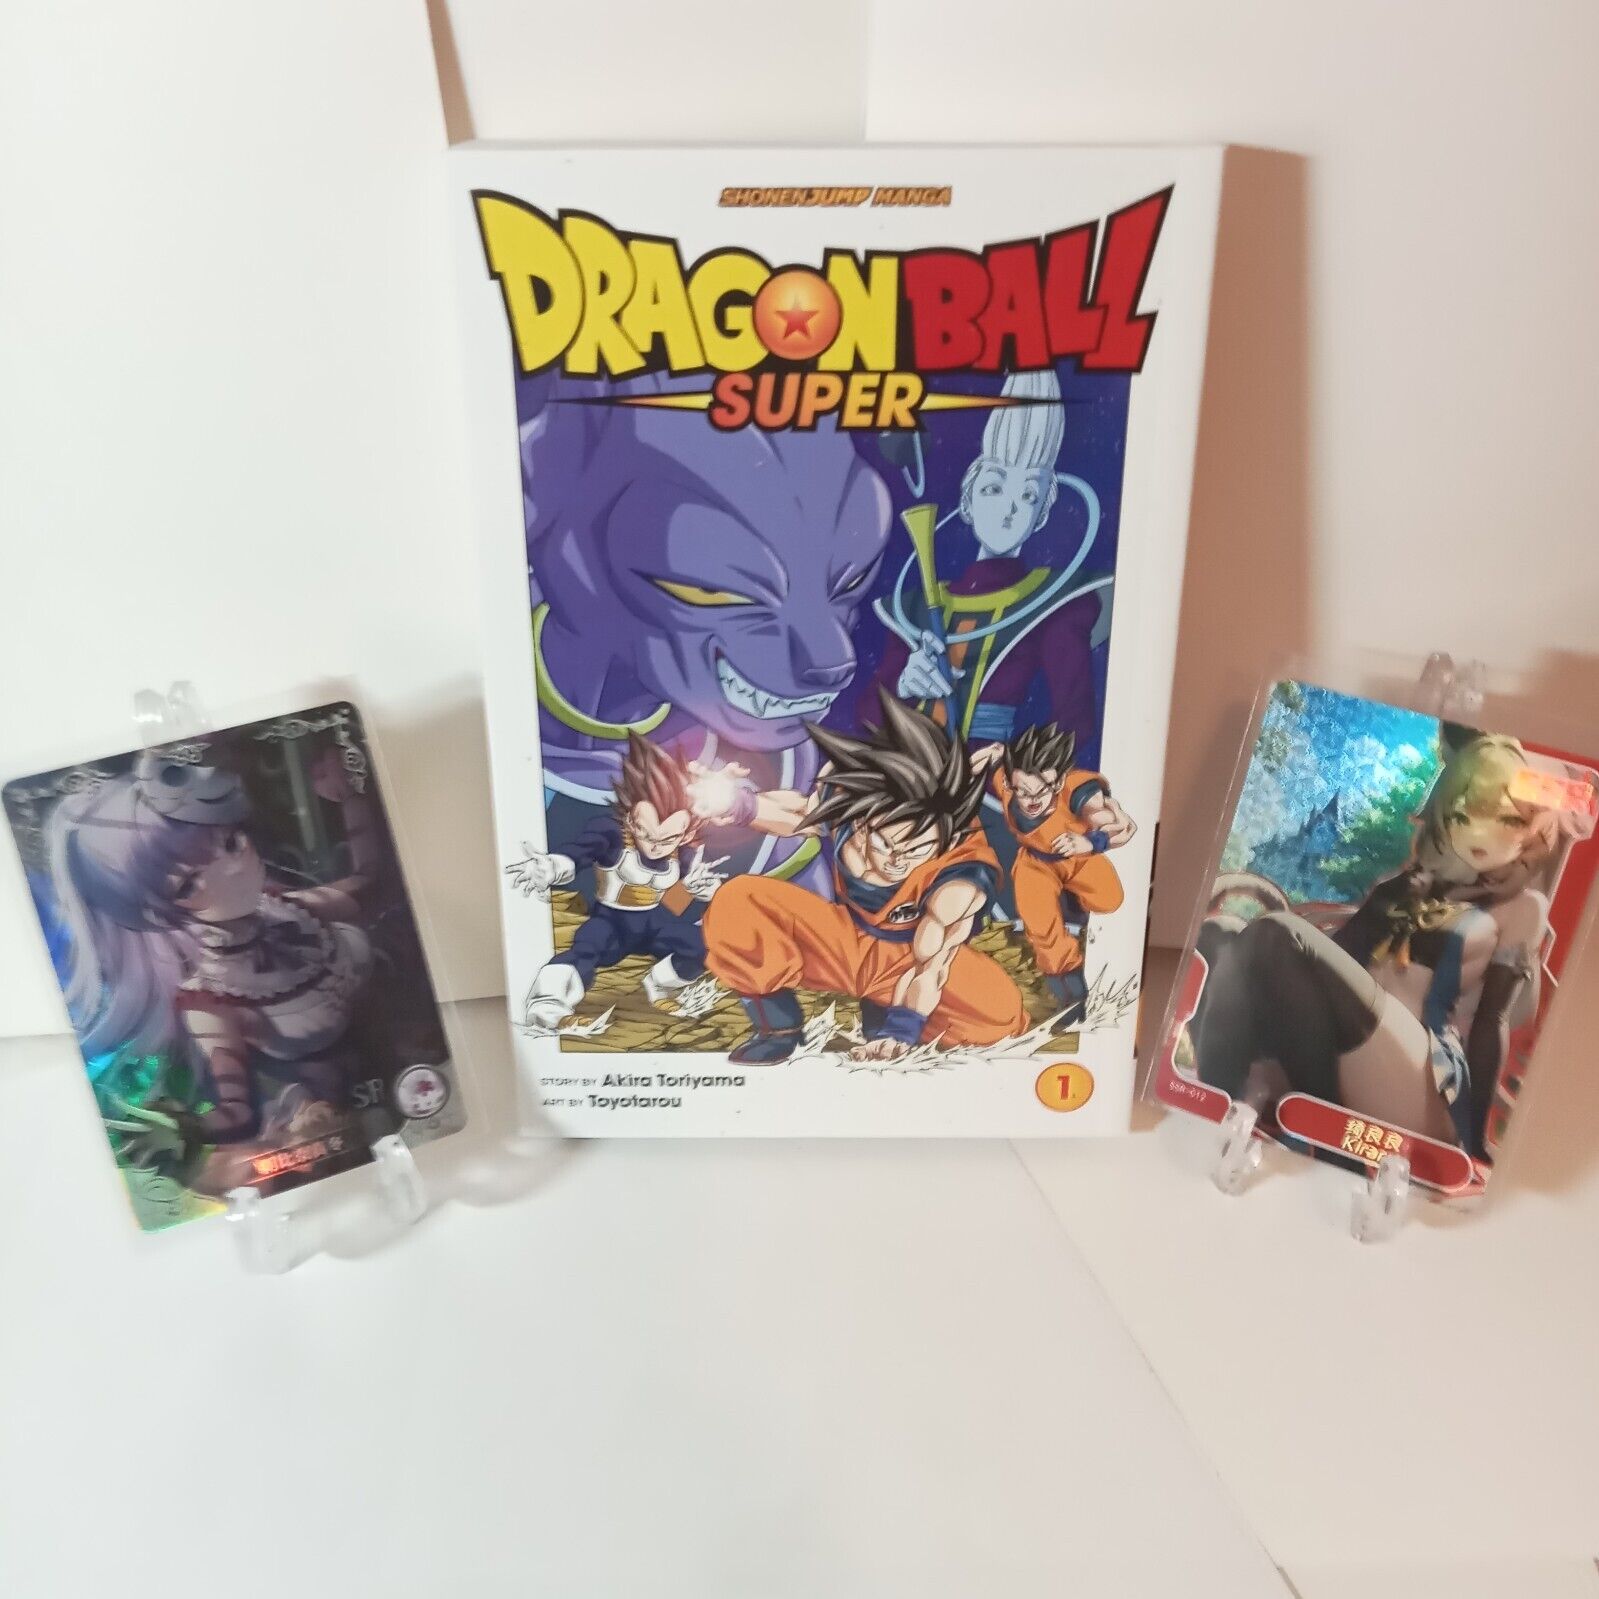 Dragon Ball Super Volume 1 Manga Loot Crate Exclusive Variant Cover + 2 Goddess